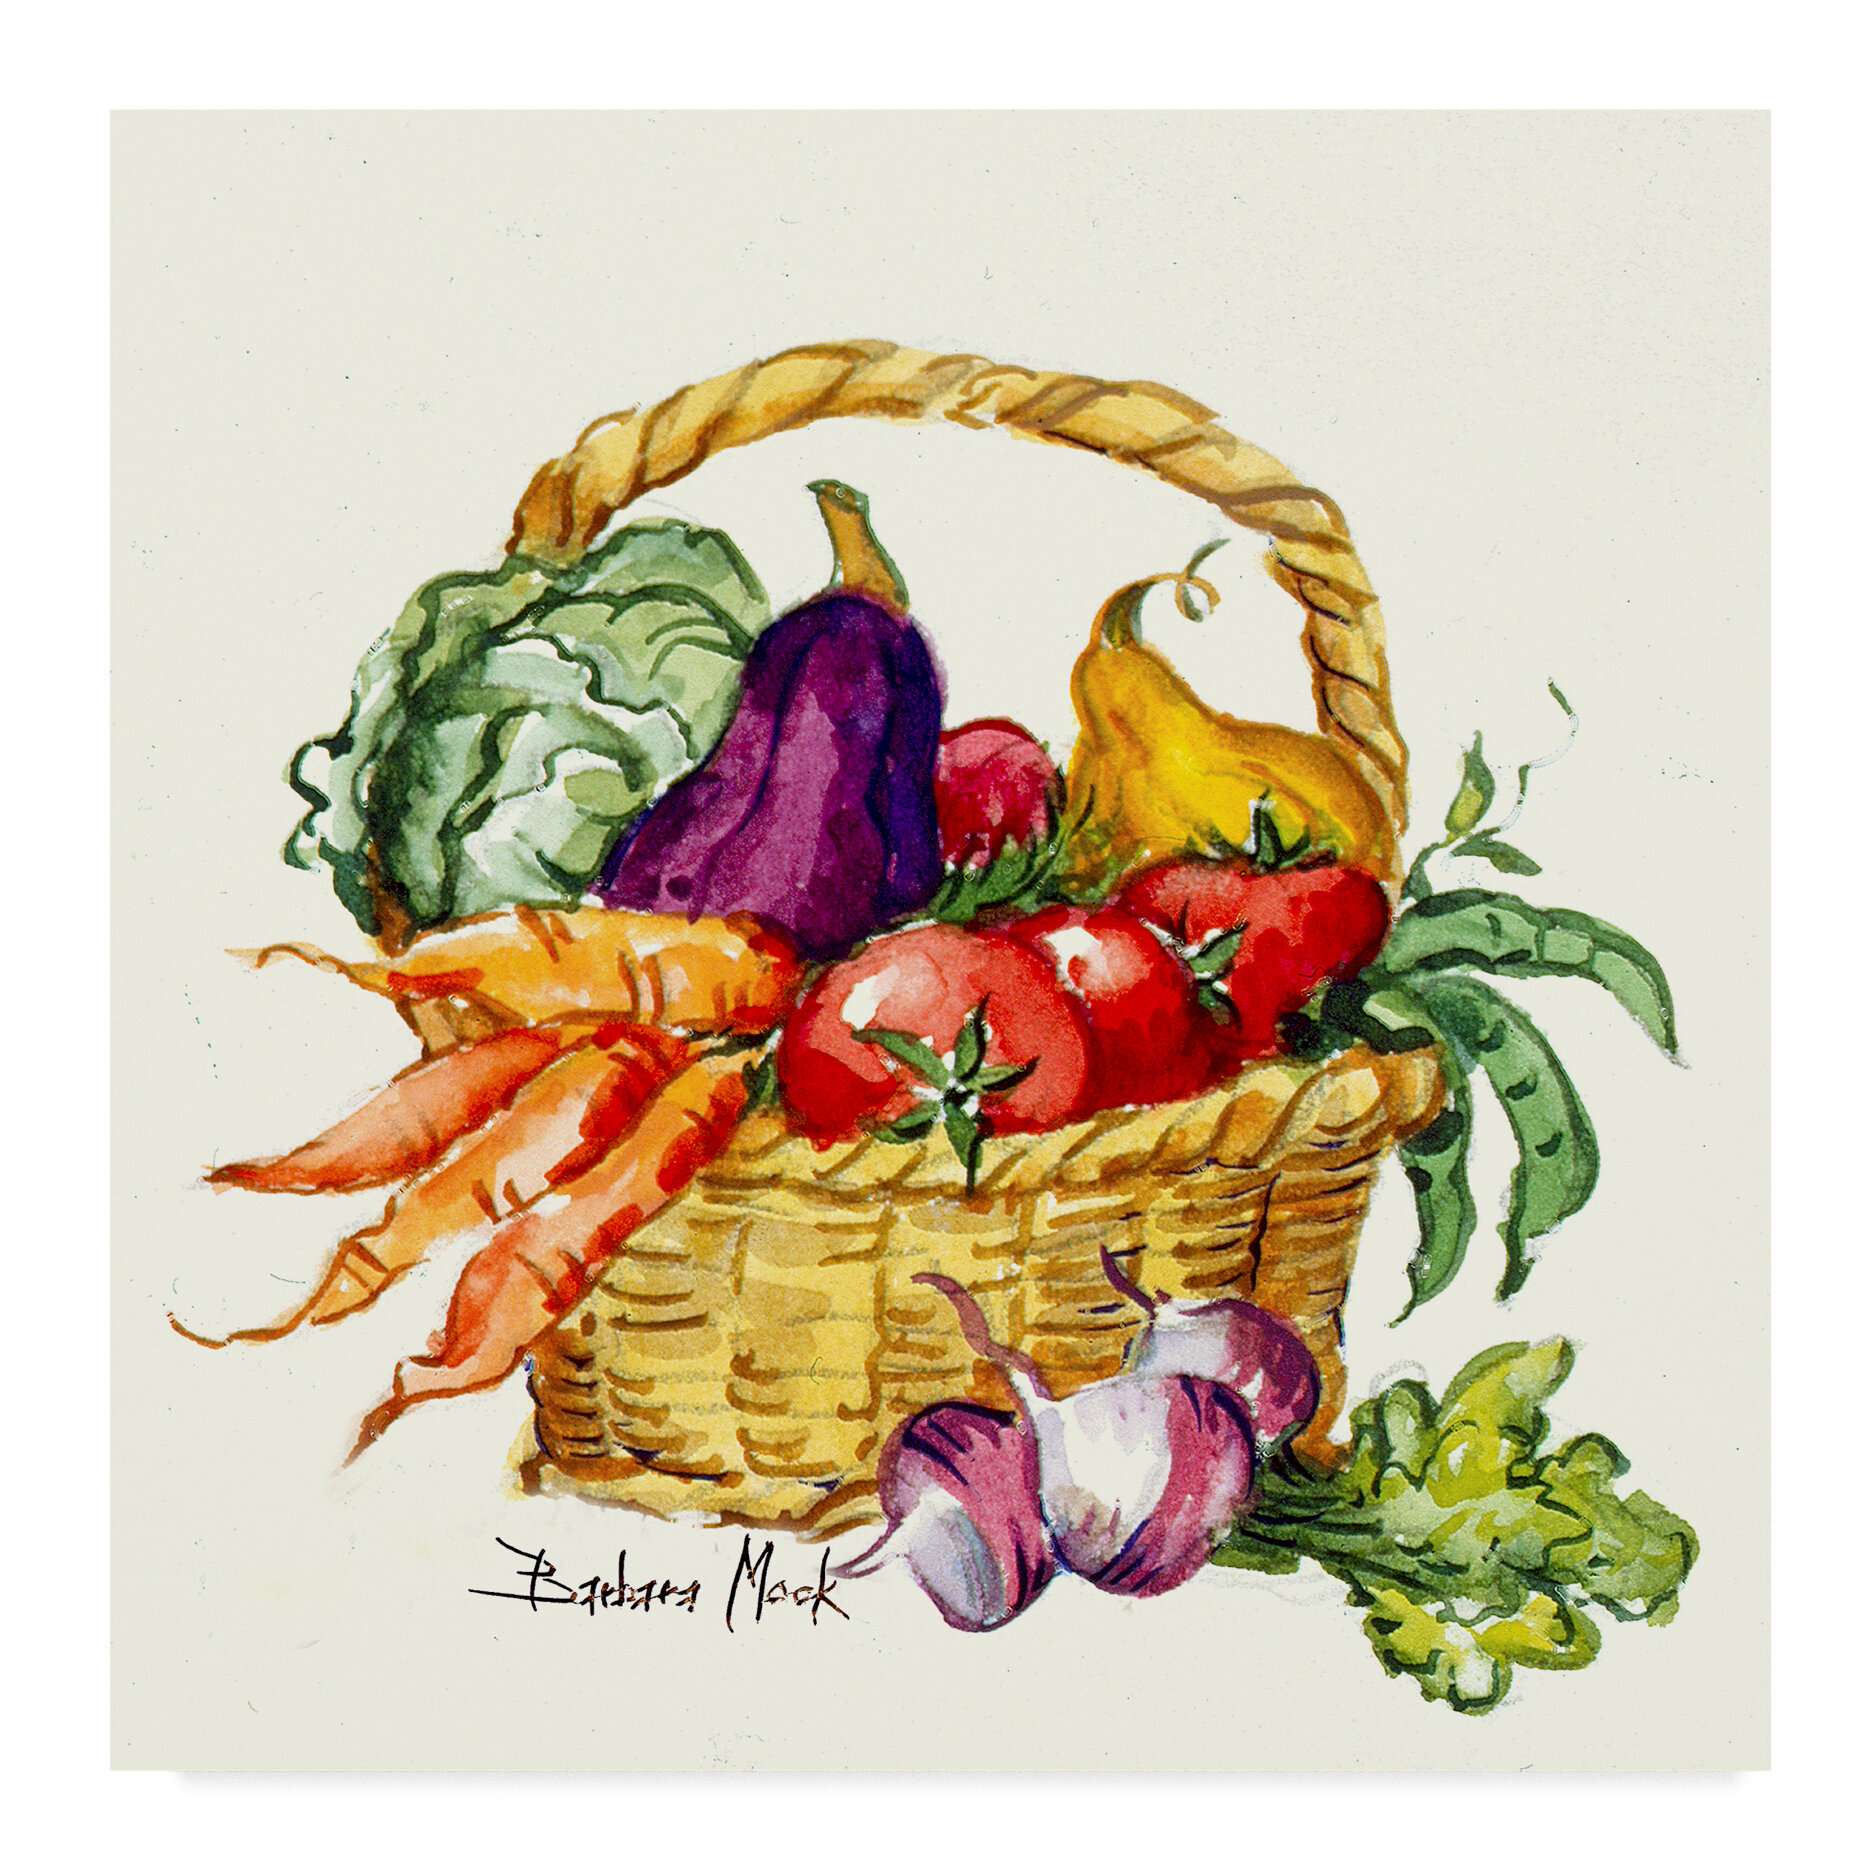 BASKET OF FRUITS AND VEGETABLES CANVAS PRINT PICTURE WALL ART FREE FAST POSTAGE